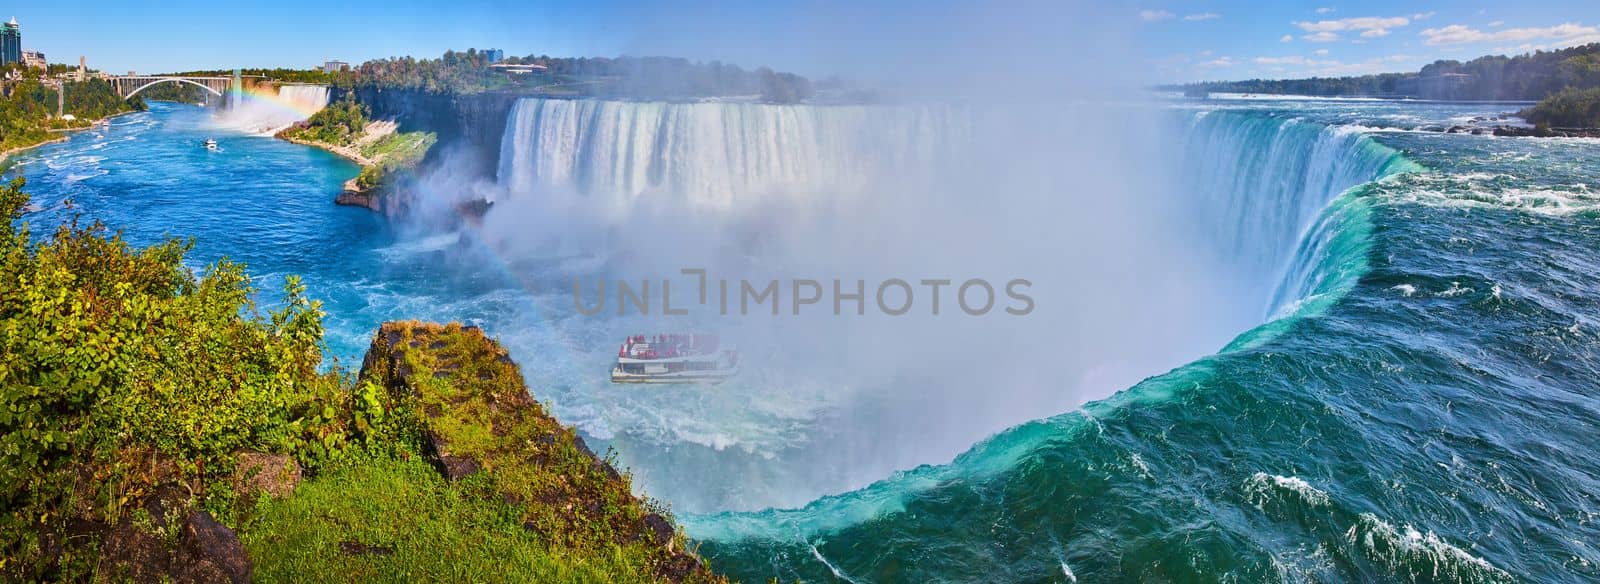 Image of Wide panorama on edge of Horseshoe Falls showcasing size and misty falls with tourist ship